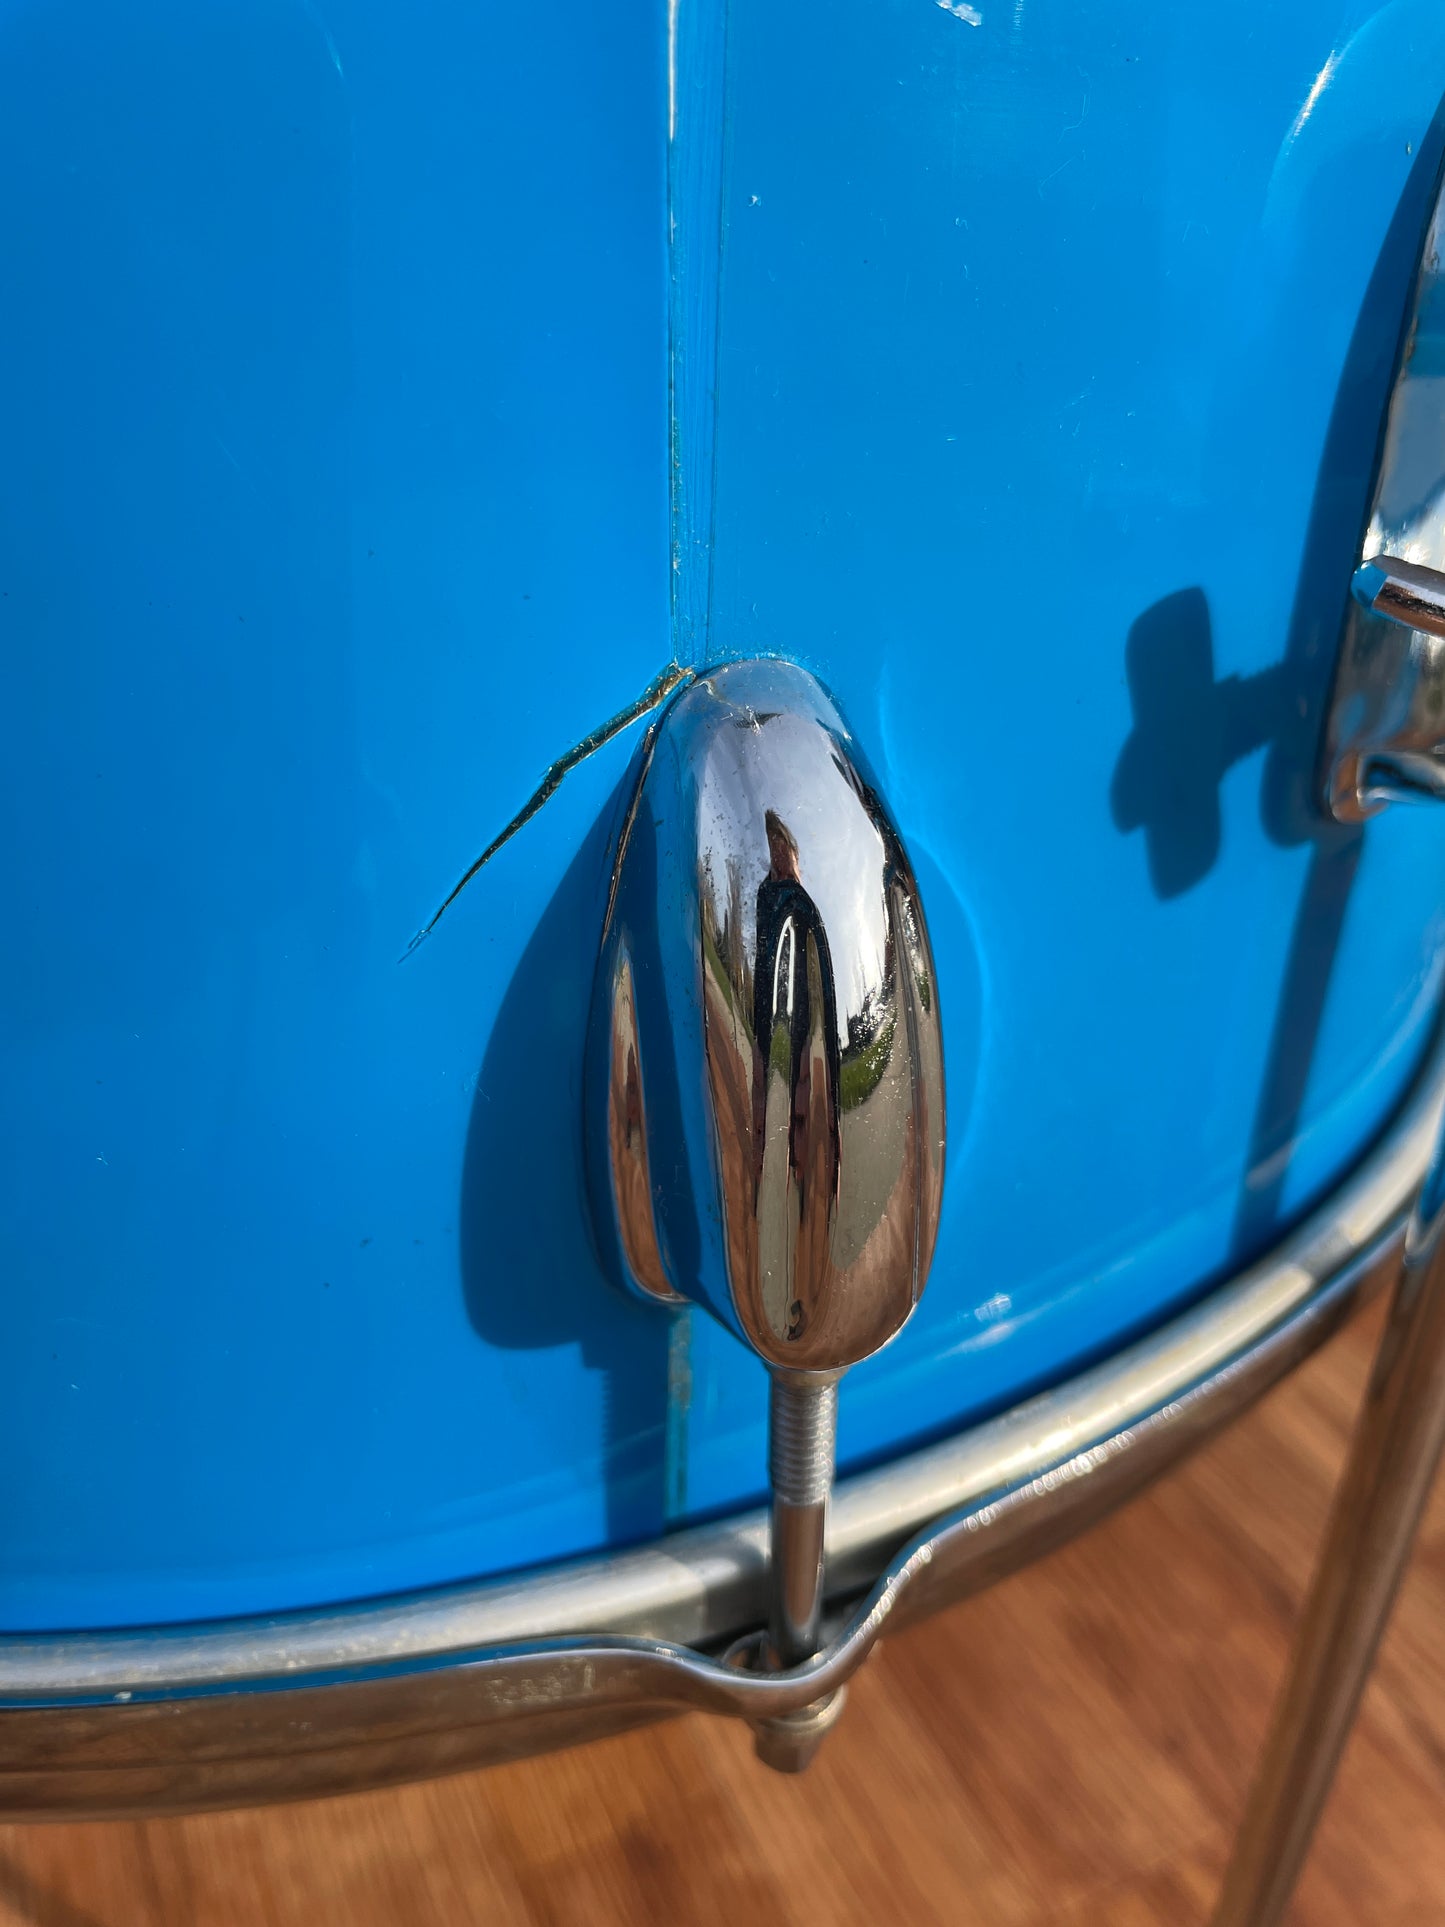 1970s Slingerland Modern Solo Outfit No. 2R Drum Set Blue Gloss